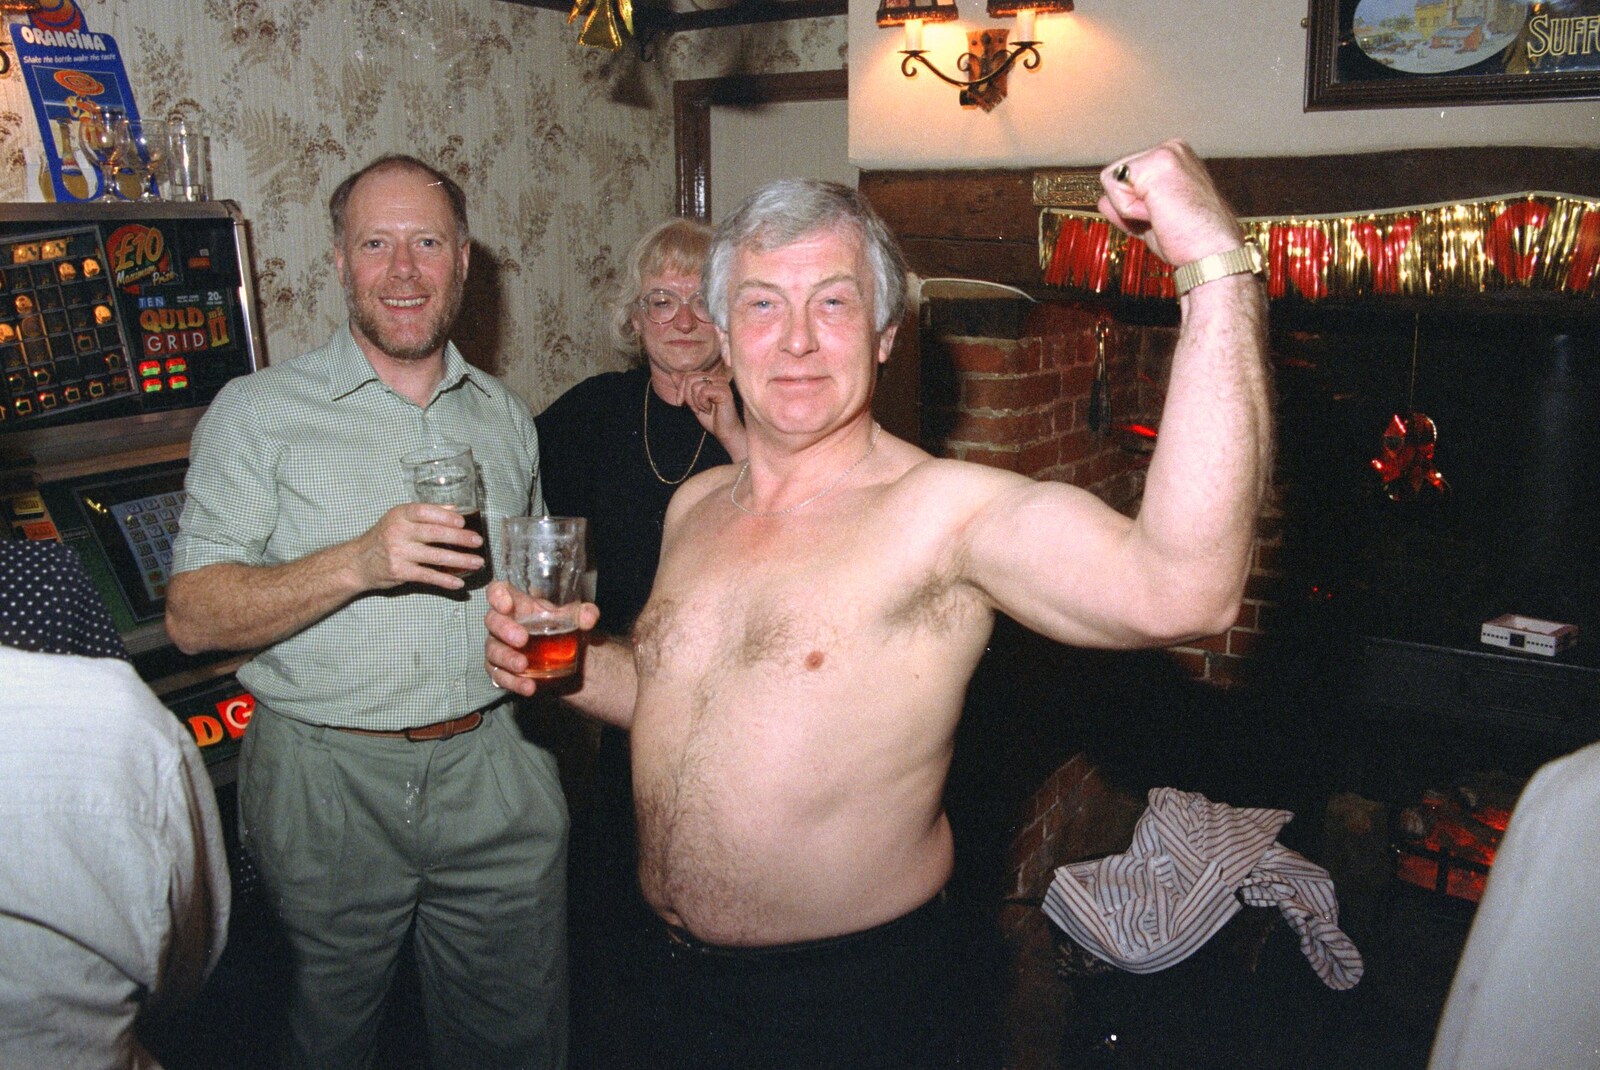 Colin shows off his biceps from New Year's Eve at the Swan Inn, Brome, Suffolk - 31st December 1991